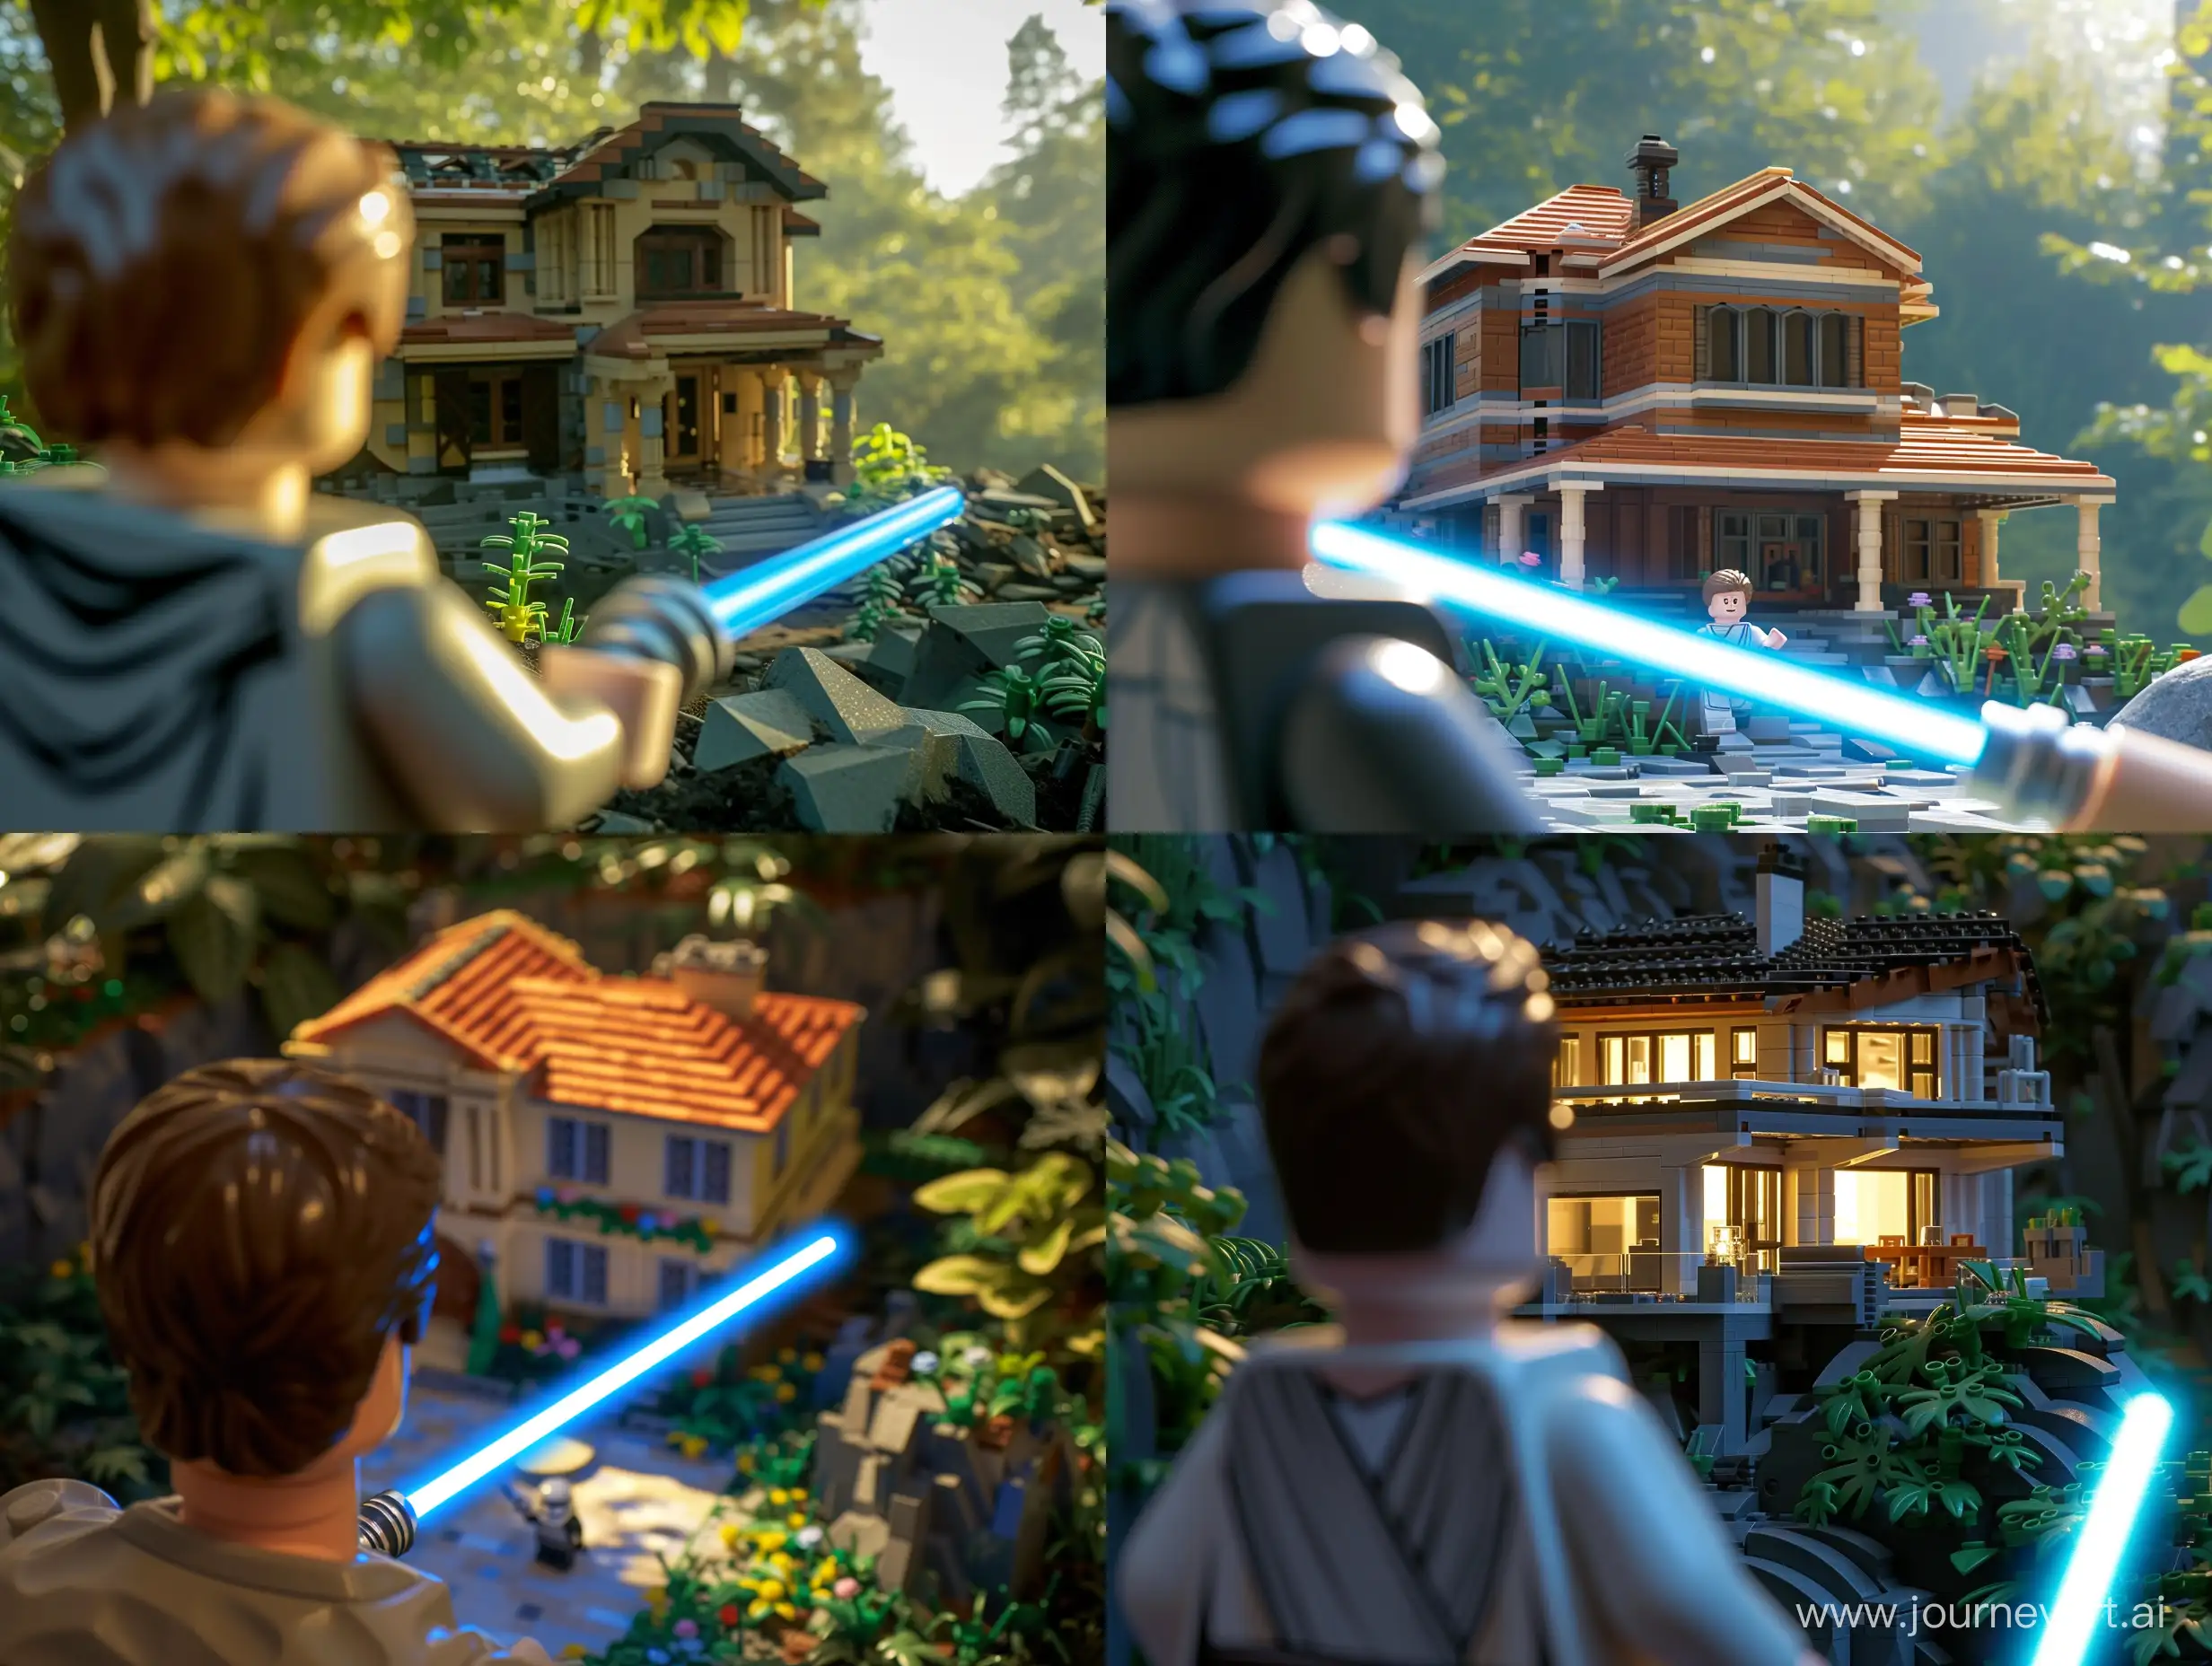 third person view of a man looking at a house, full view, day time, natural lighting, environment, architecture, nature, lego star wars gameplay, holding light saber,
